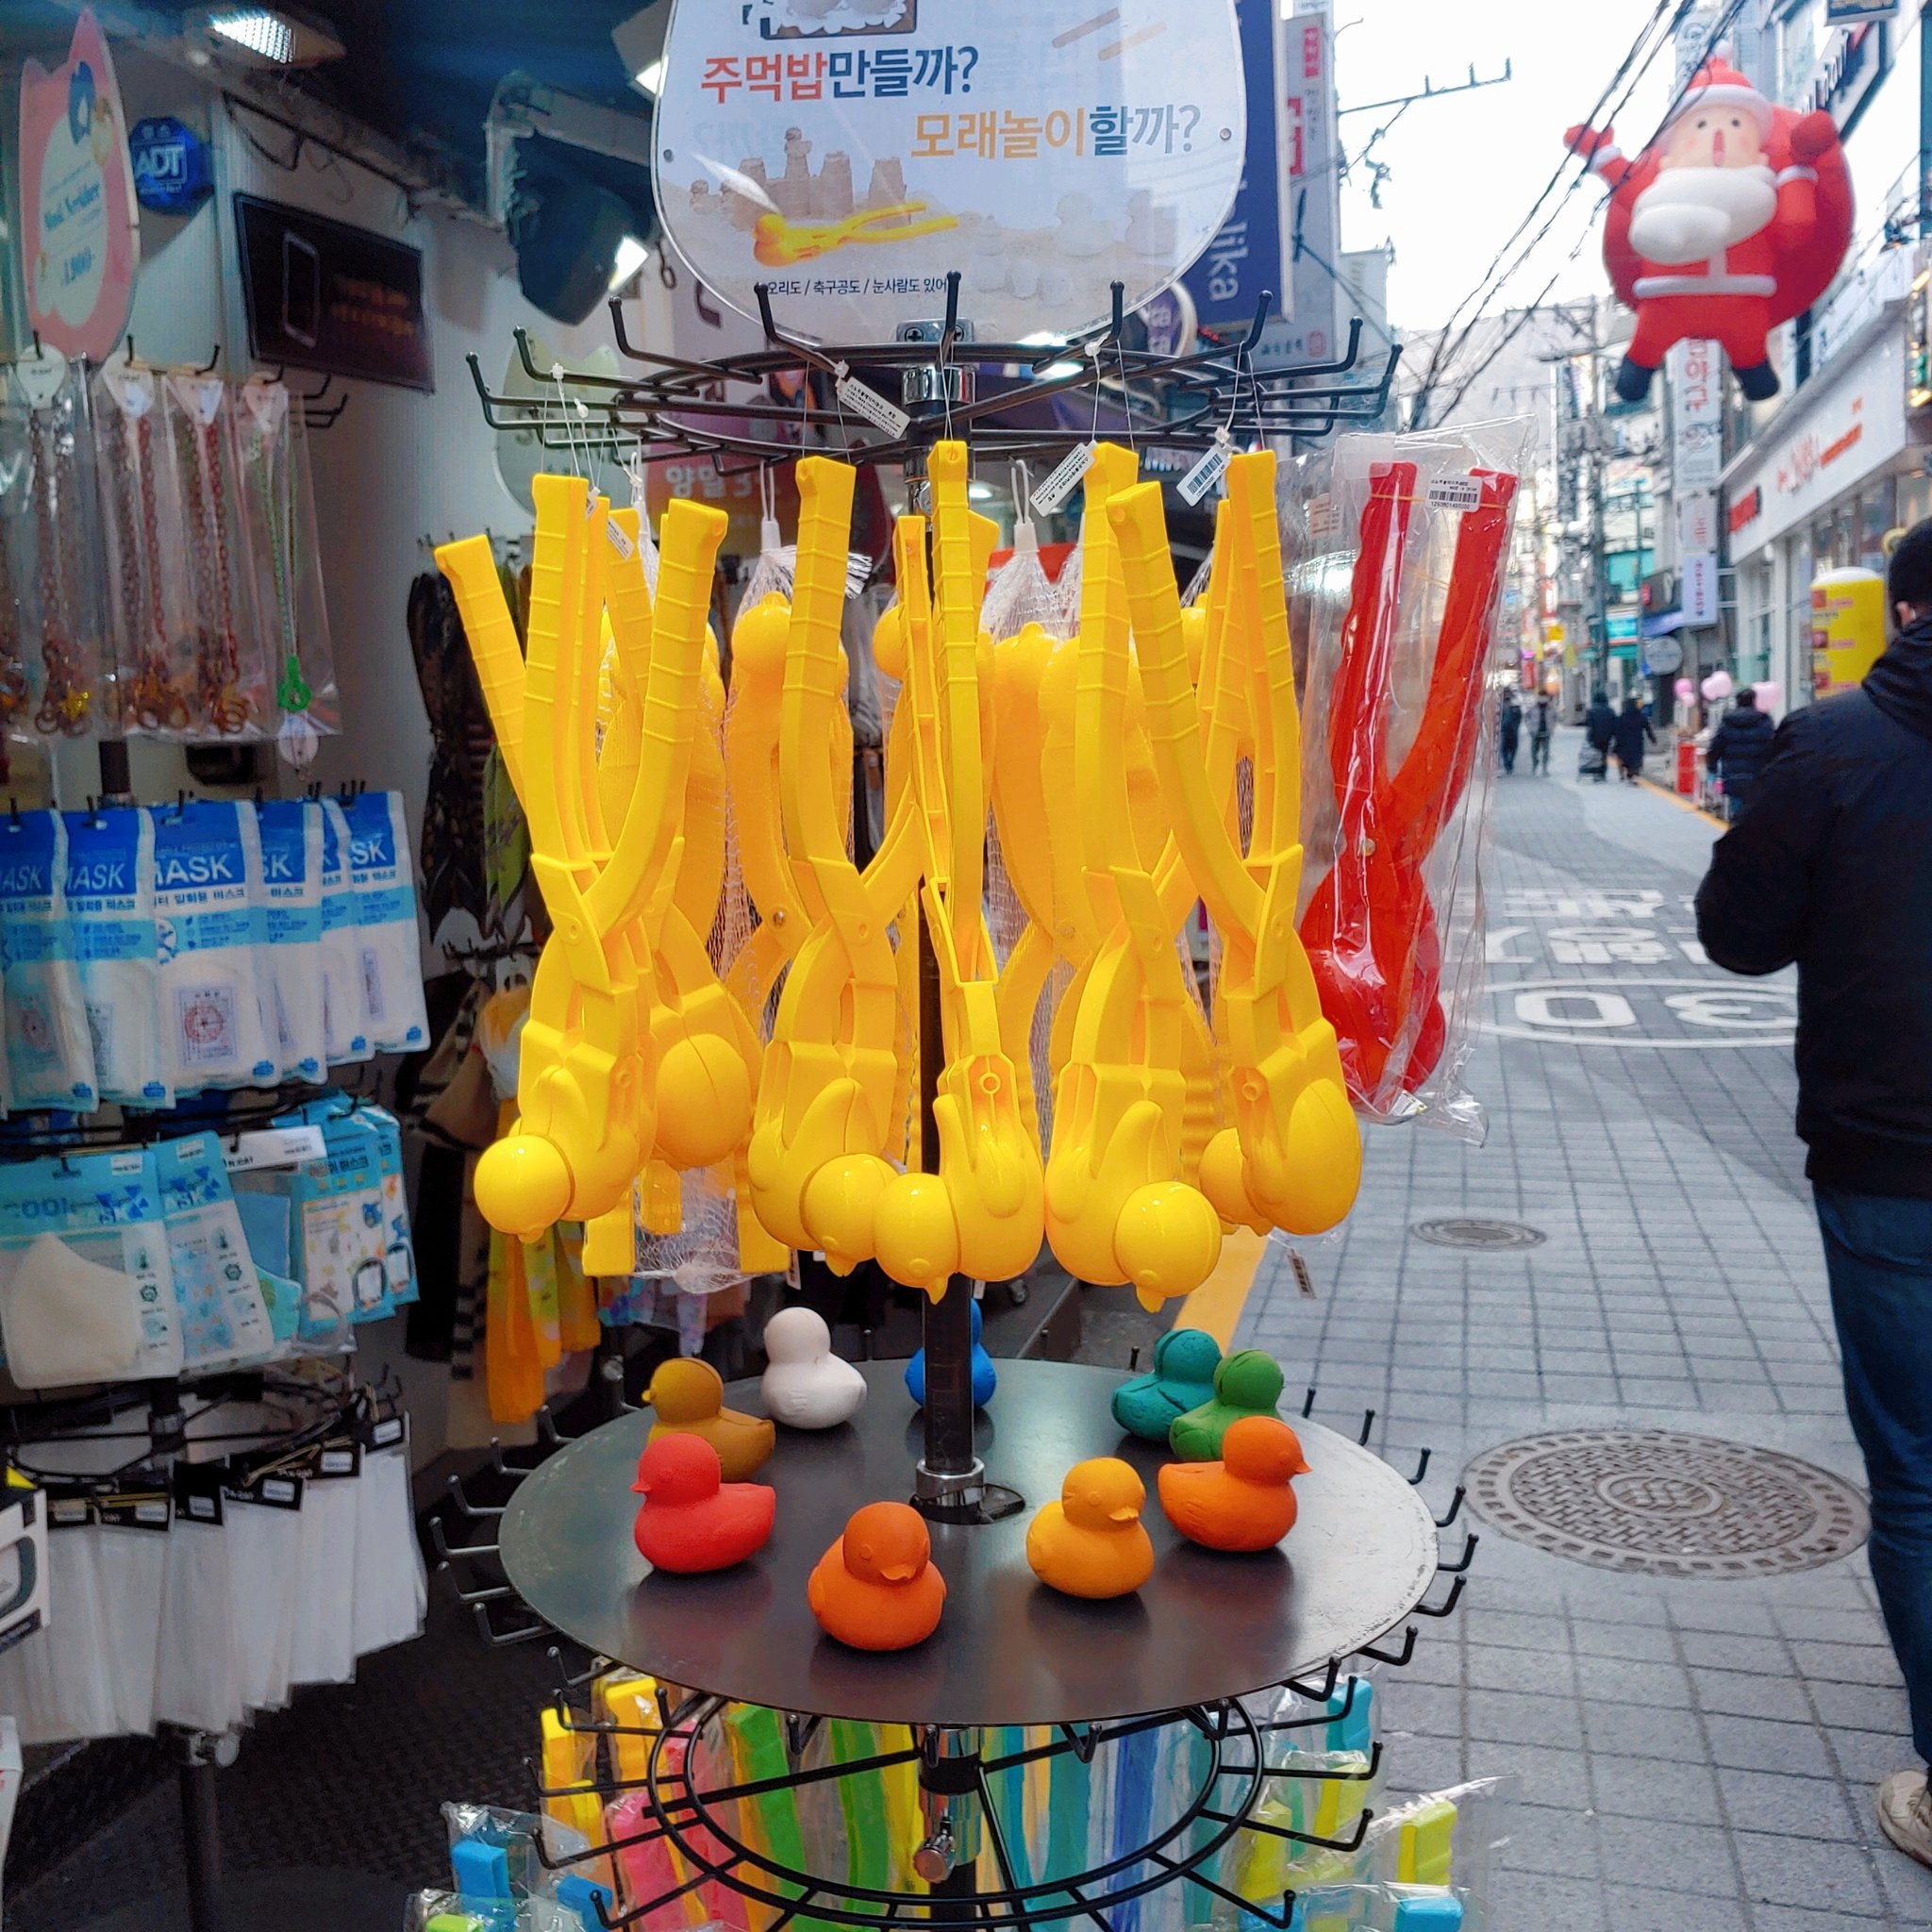 In Busan, we have a lot of goods in stock.jpg